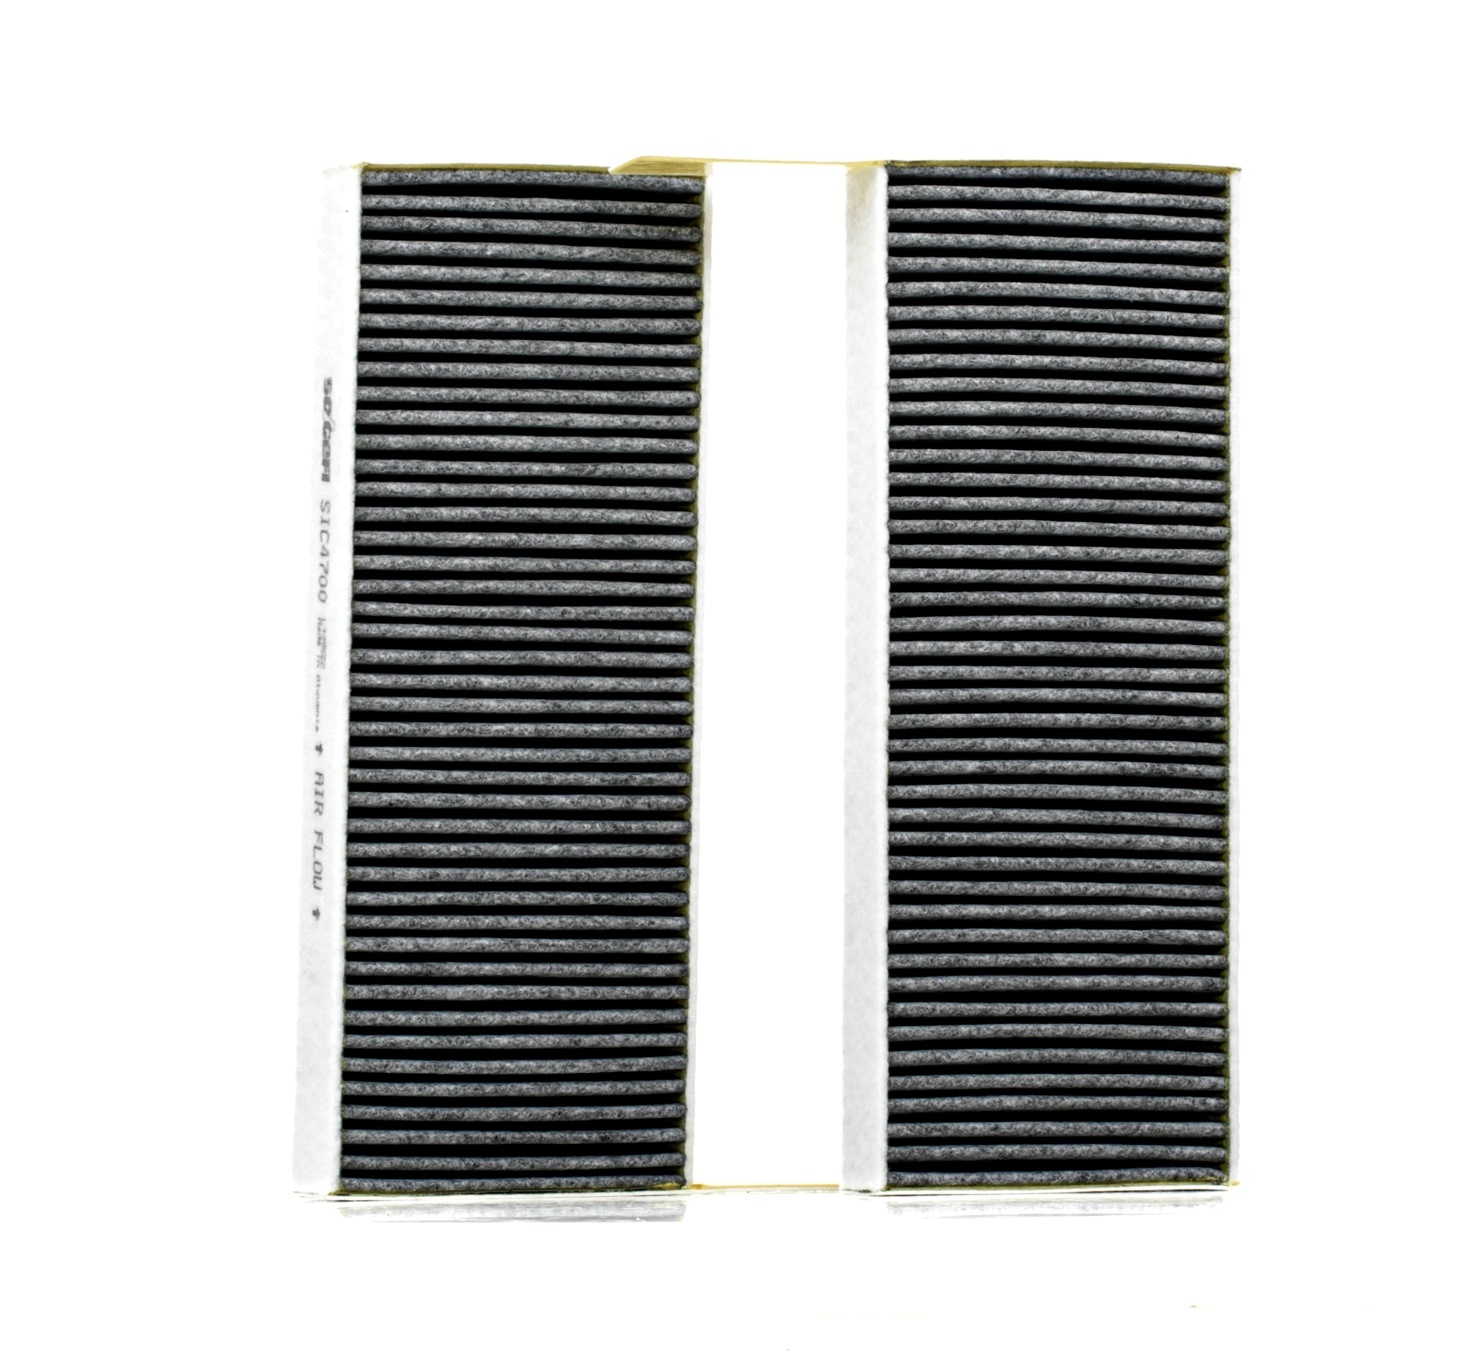 SIC4700 PURFLUX Activated Carbon Filter, 260 mm x 97 mm x 30 mm Width: 97mm, Height: 30mm, Length: 260mm Cabin filter AHC425-2 buy